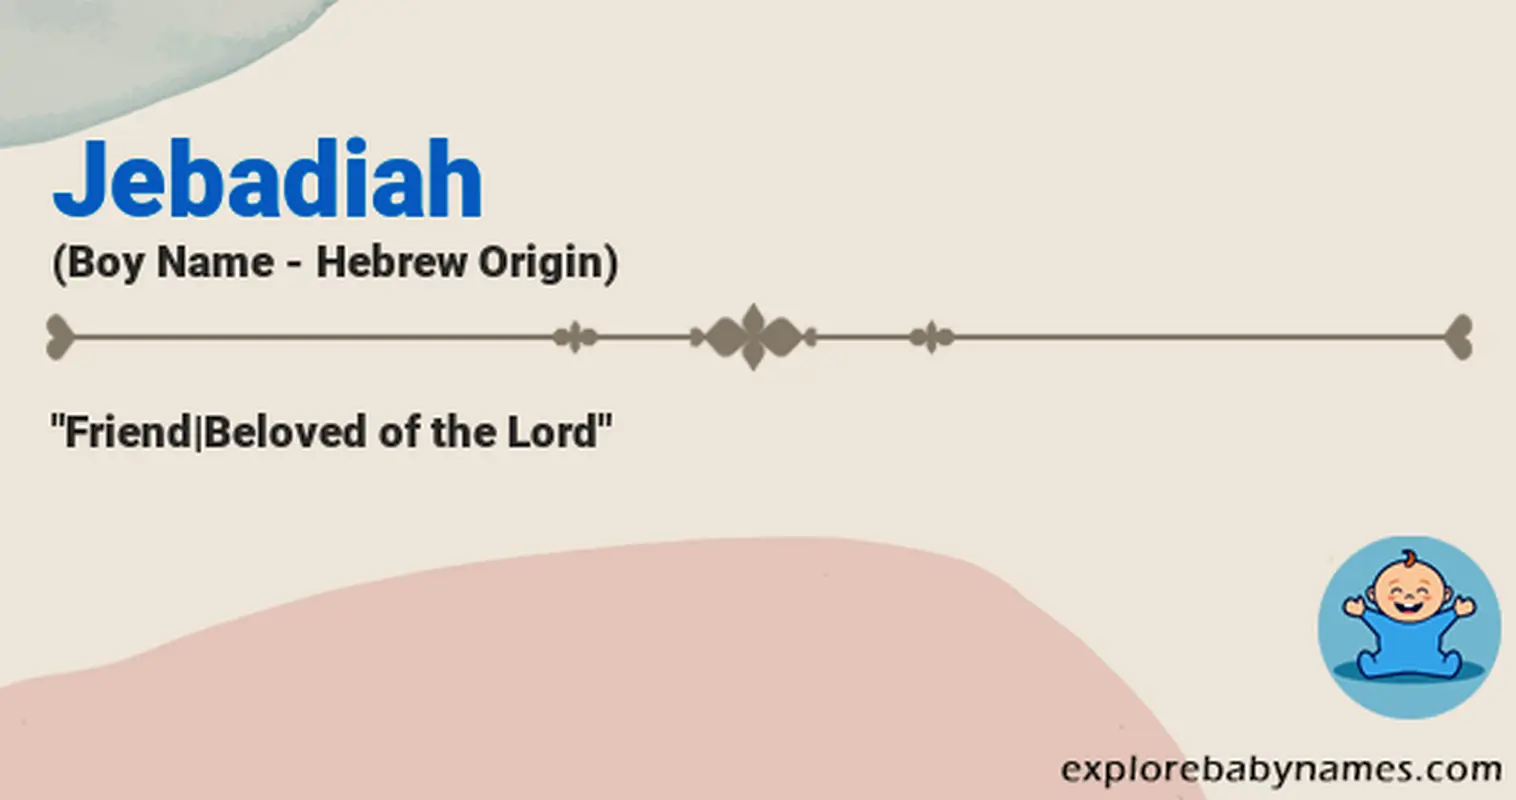 Meaning of Jebadiah